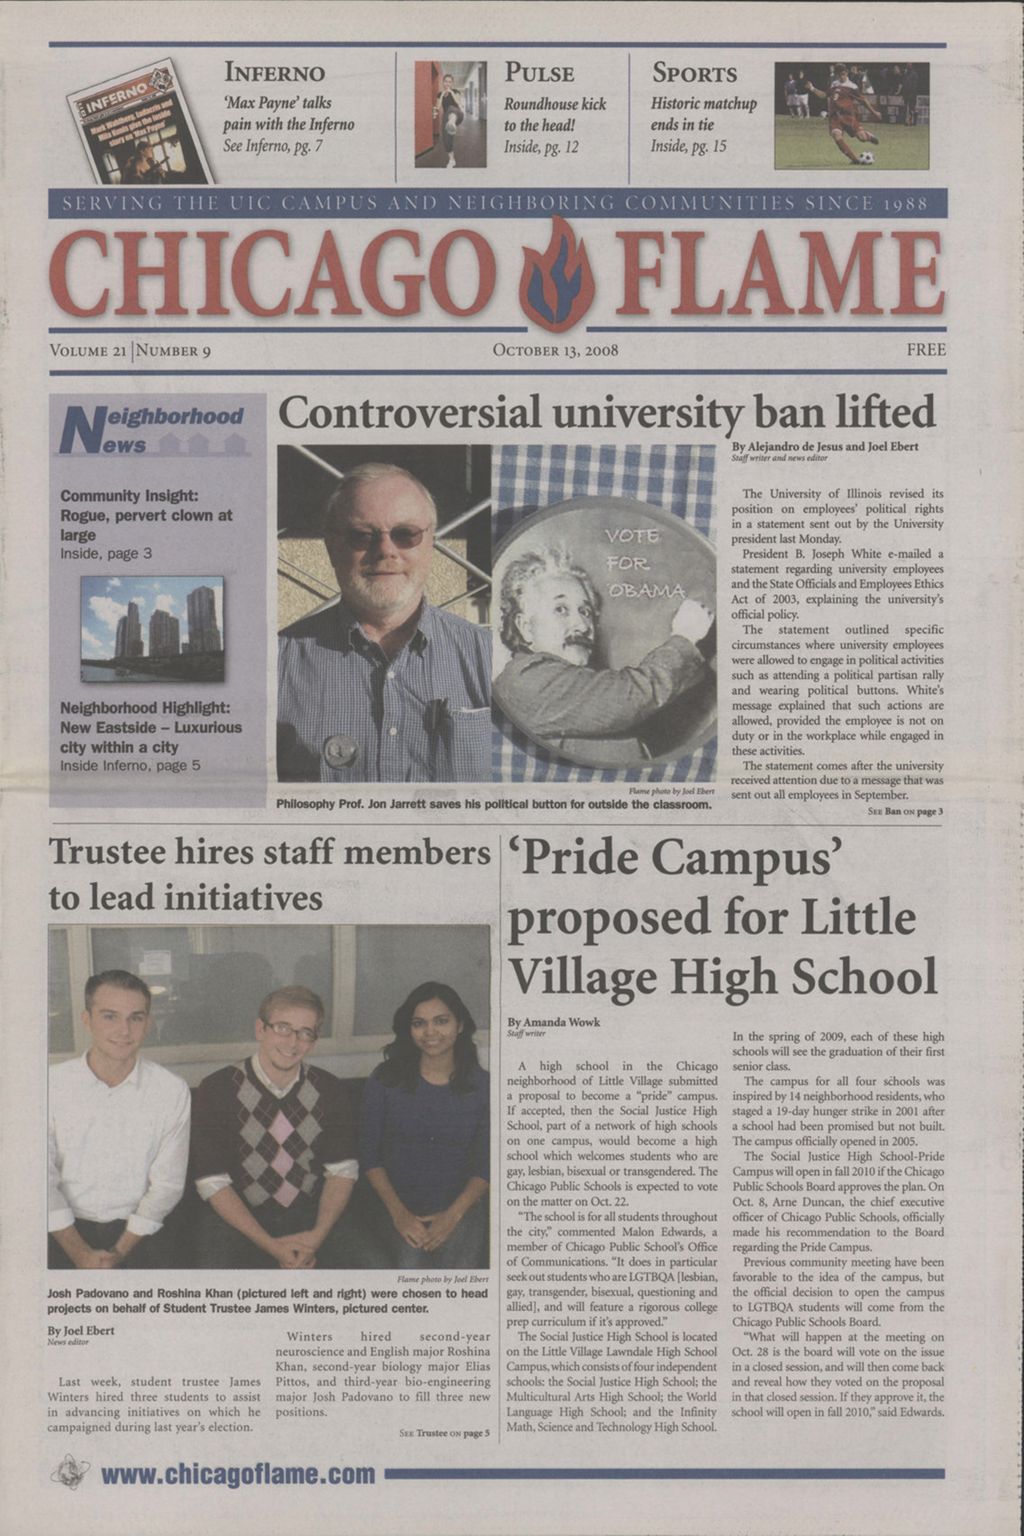 Chicago Flame (October 13, 2008)